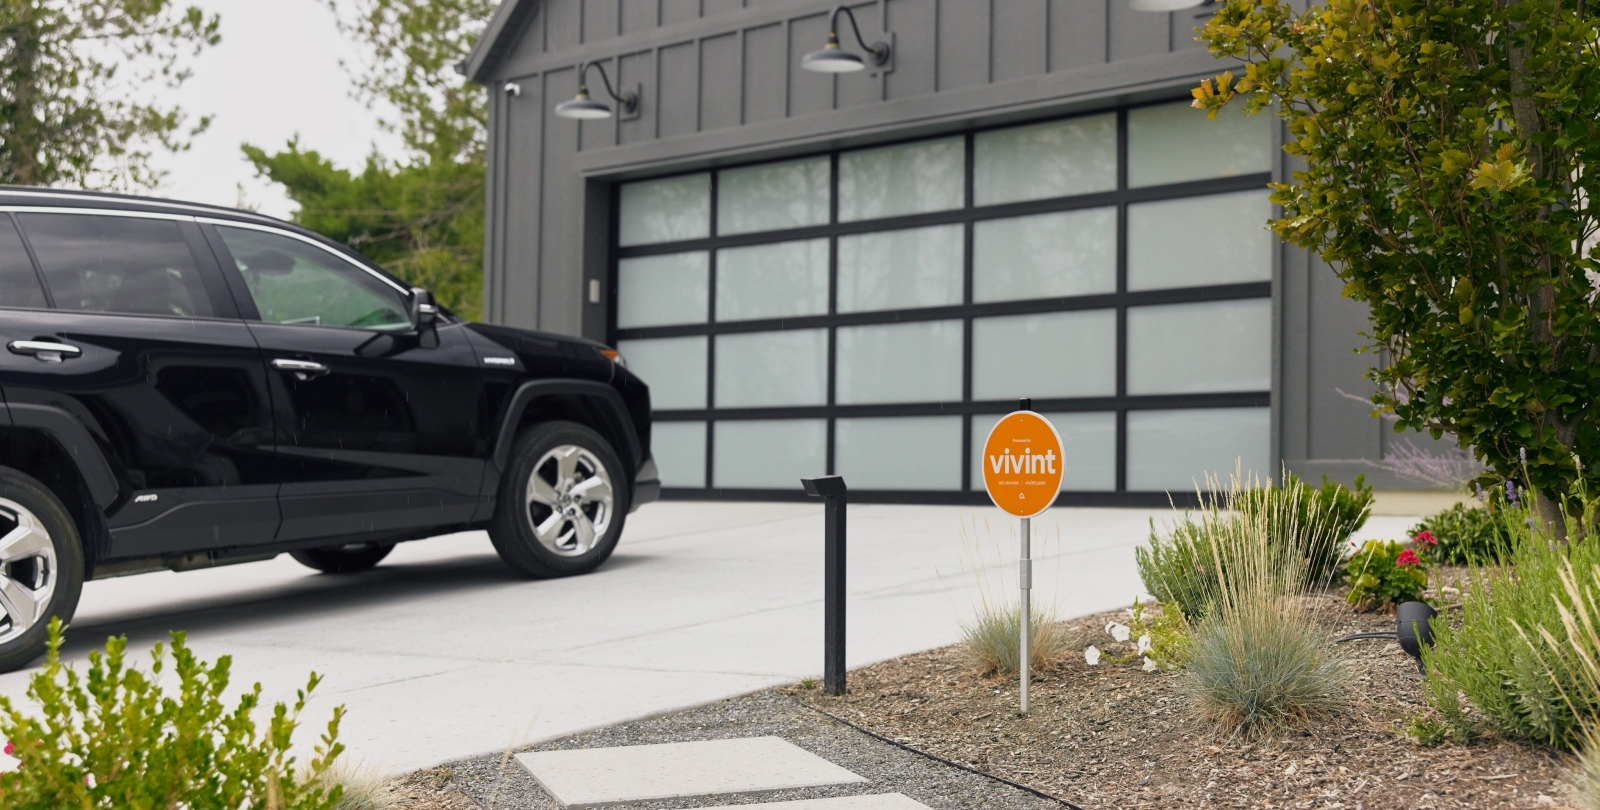 Residential Vivint security sign on display in front of a customers home.